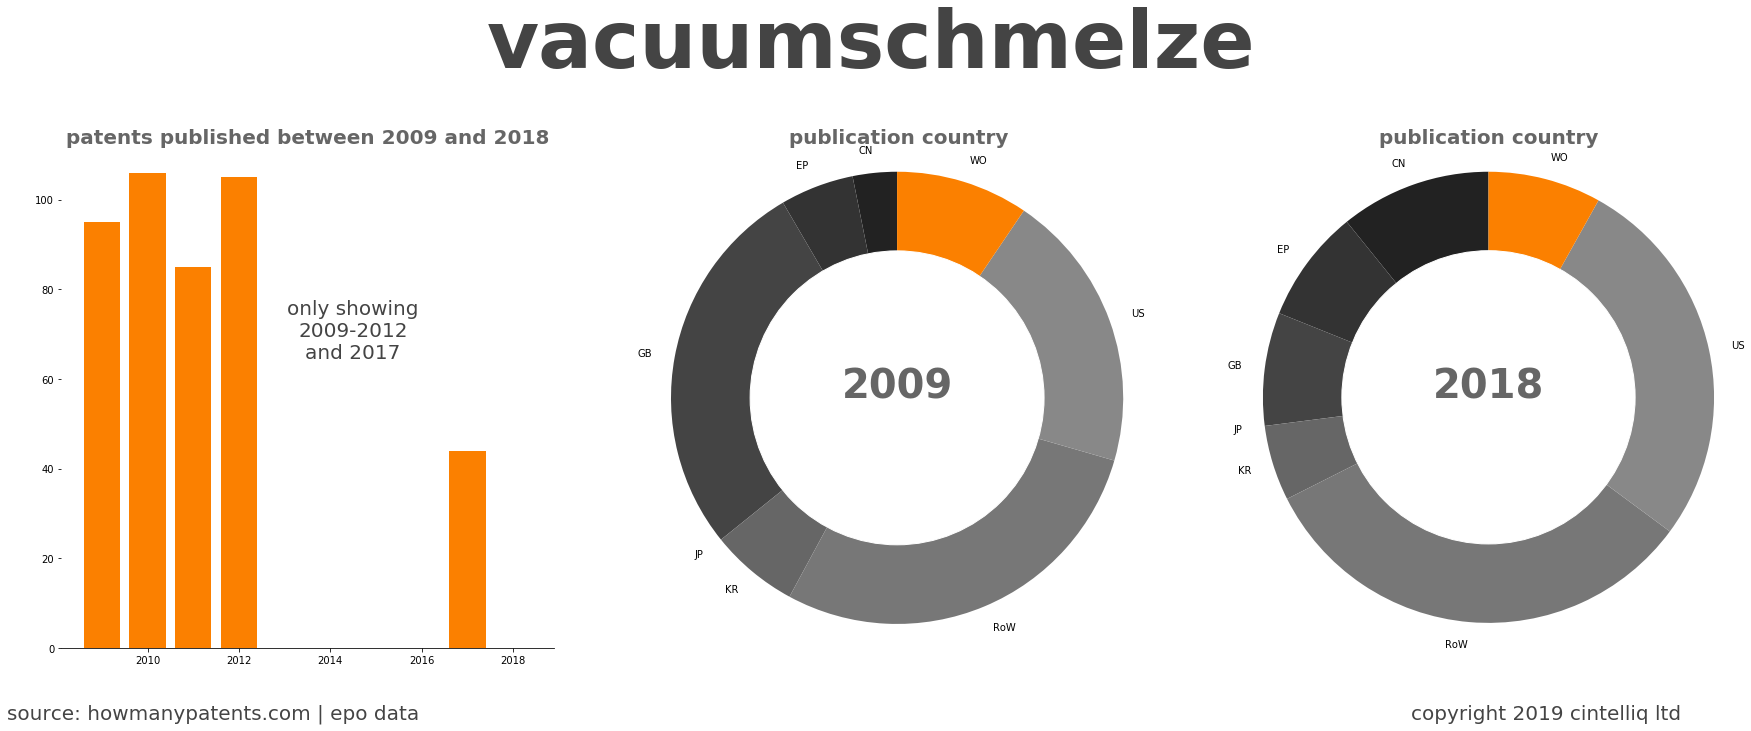 summary of patents for Vacuumschmelze